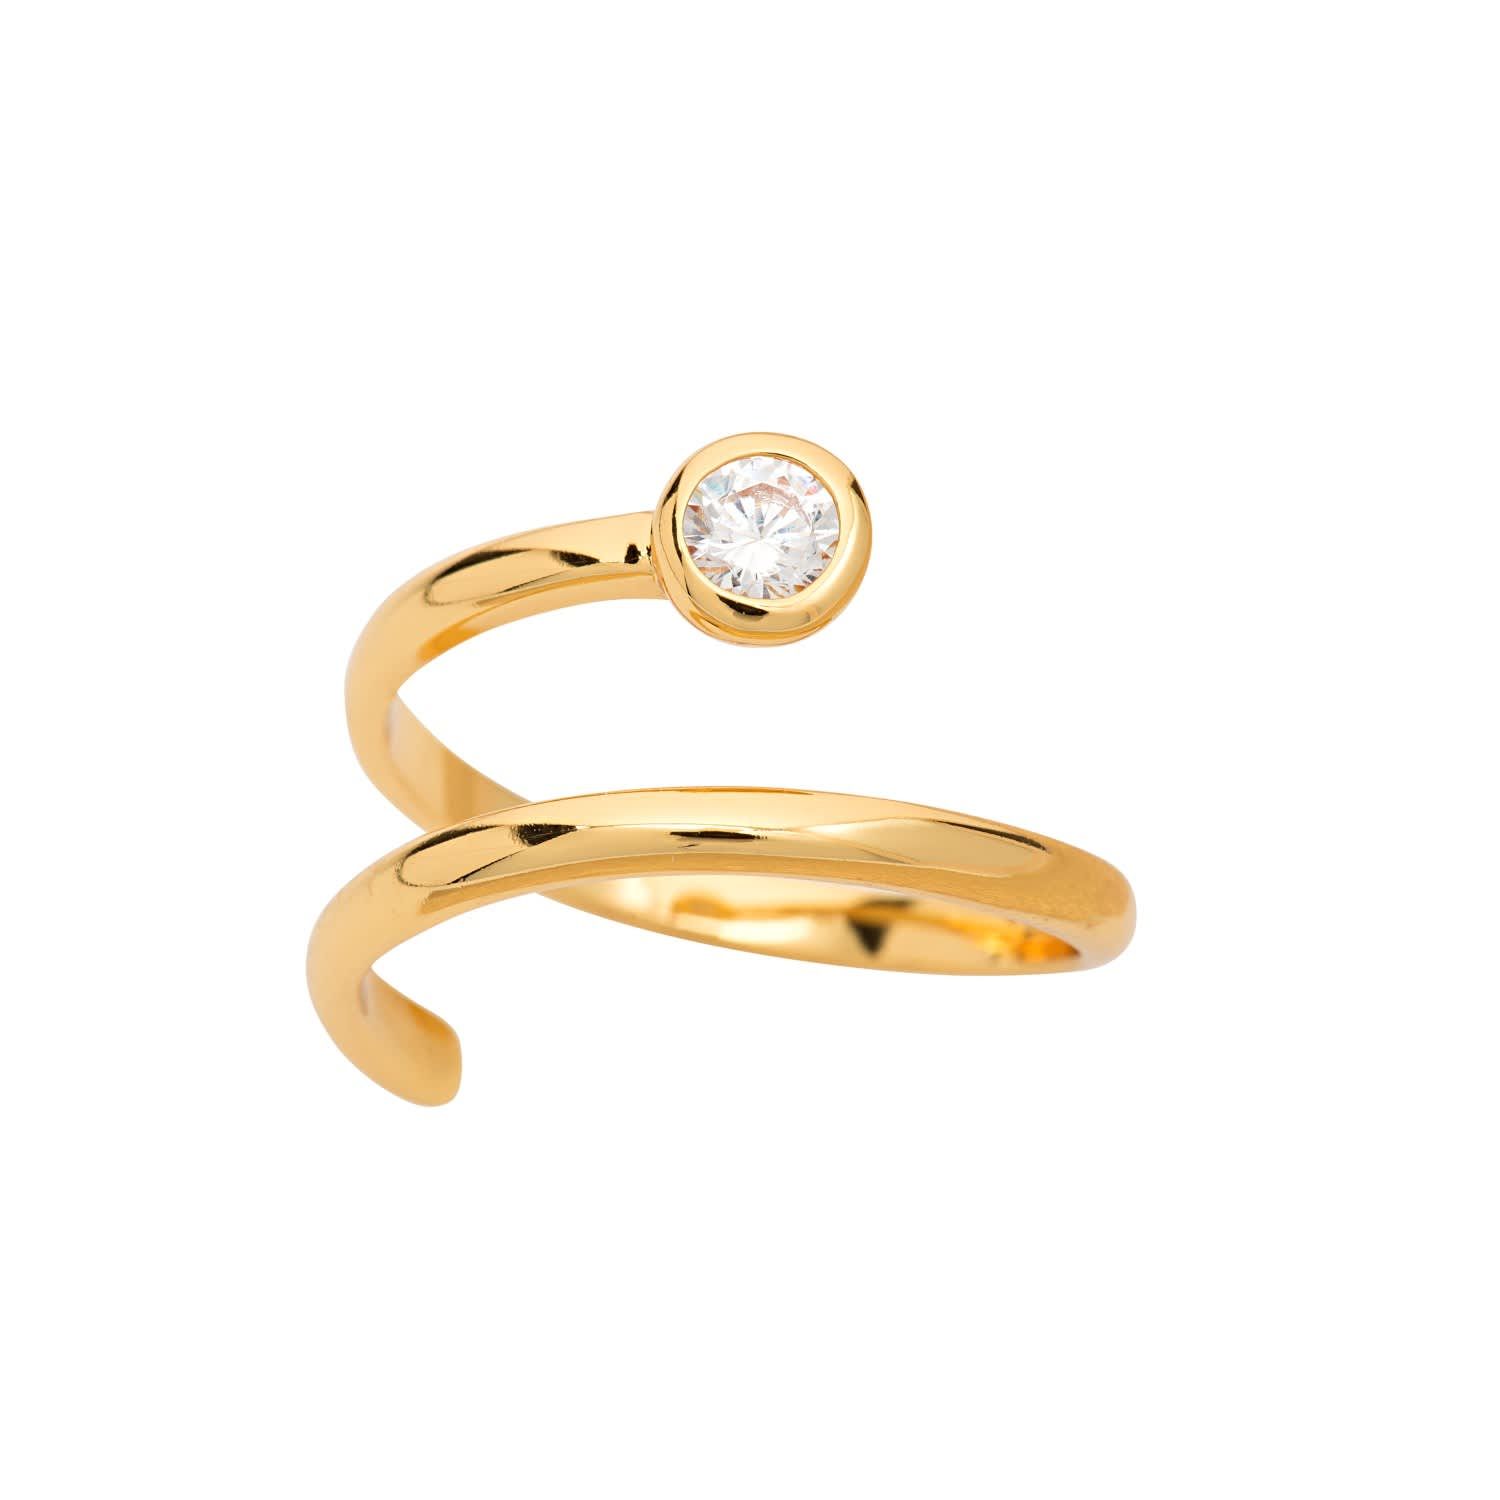 Gold Adjustable Spiral Ring With Clear Stone | Wolf and Badger (Global excl. US)